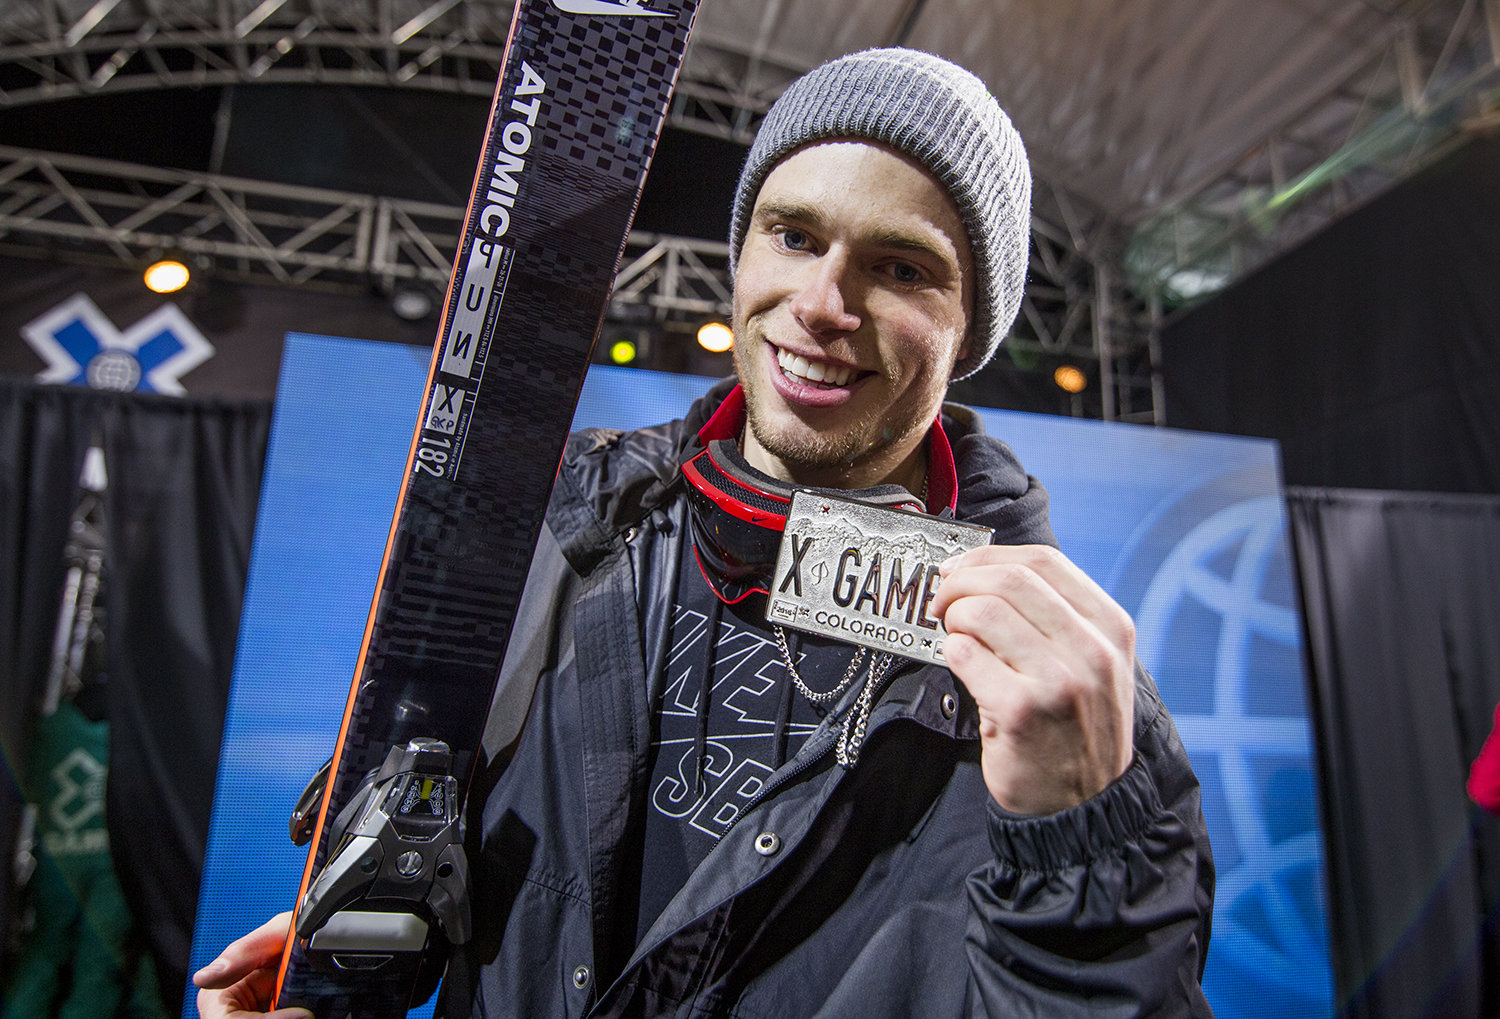 Monster Energy's Gus Kenworthy is Ready to Compete in Men's Ski SuperPipe at X Games 2021